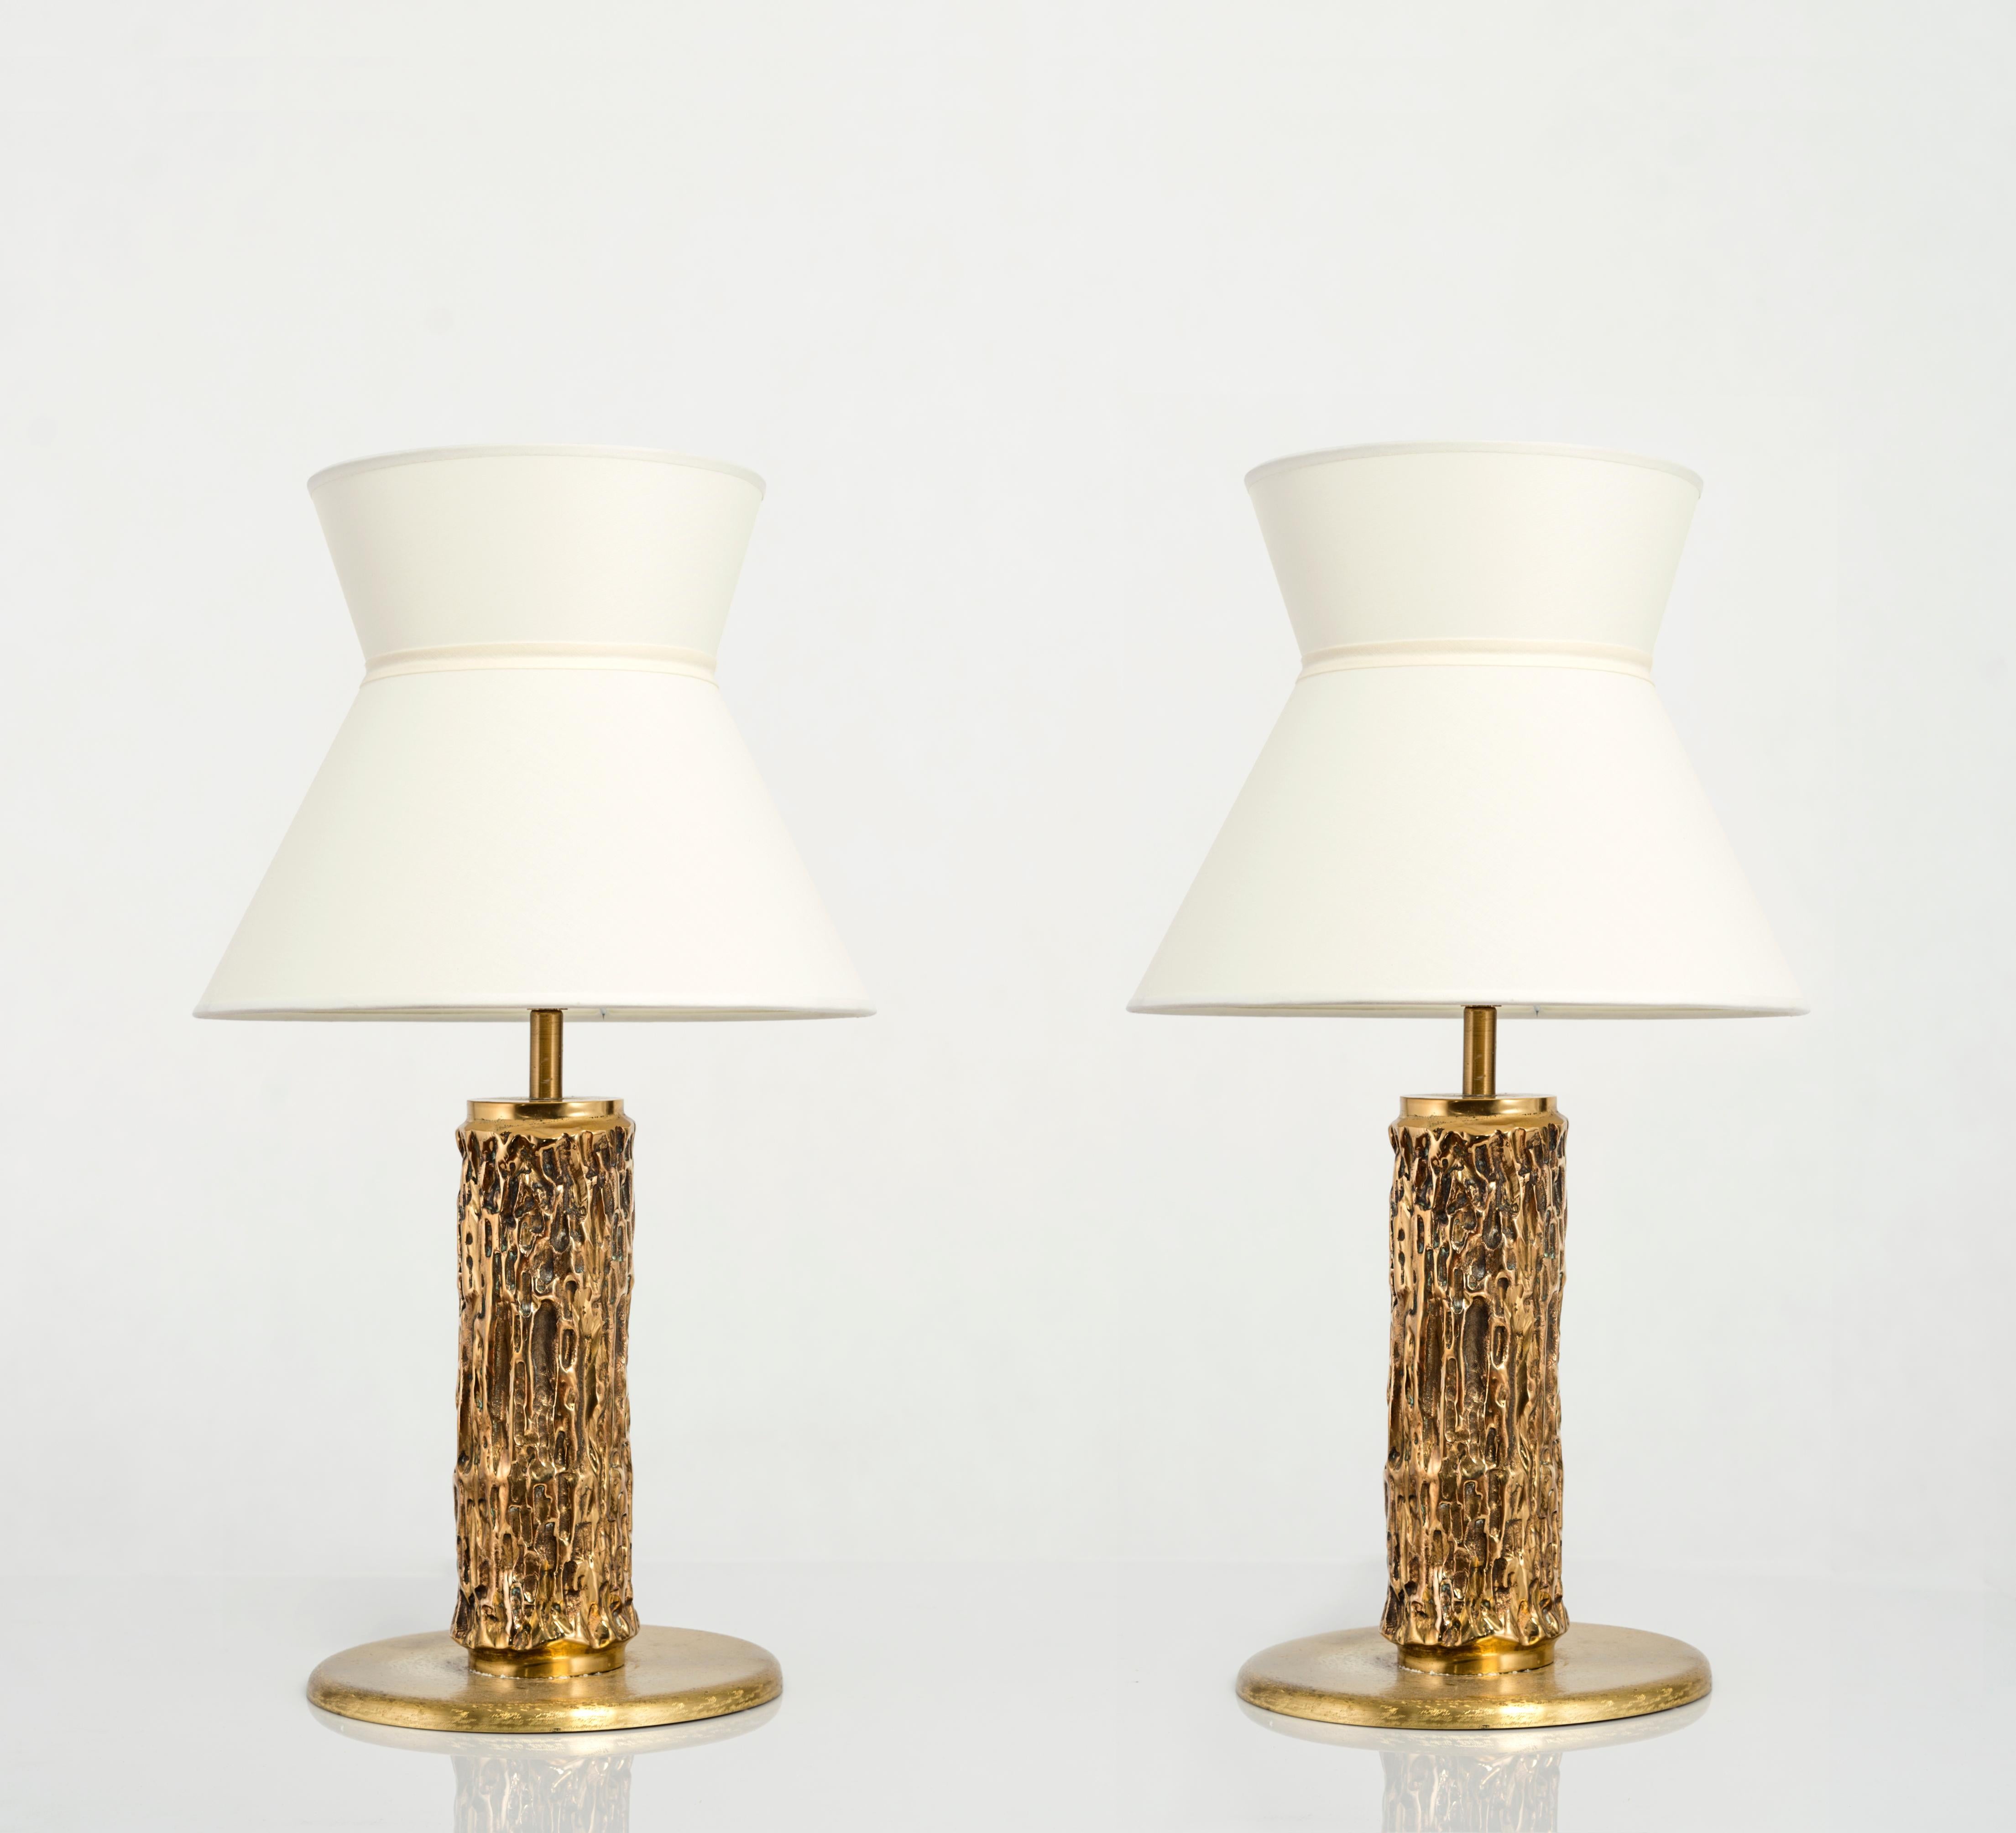 Carved Pair of Bronze Table Lamps by Luciano Frigerio, Italy, 1980s For Sale